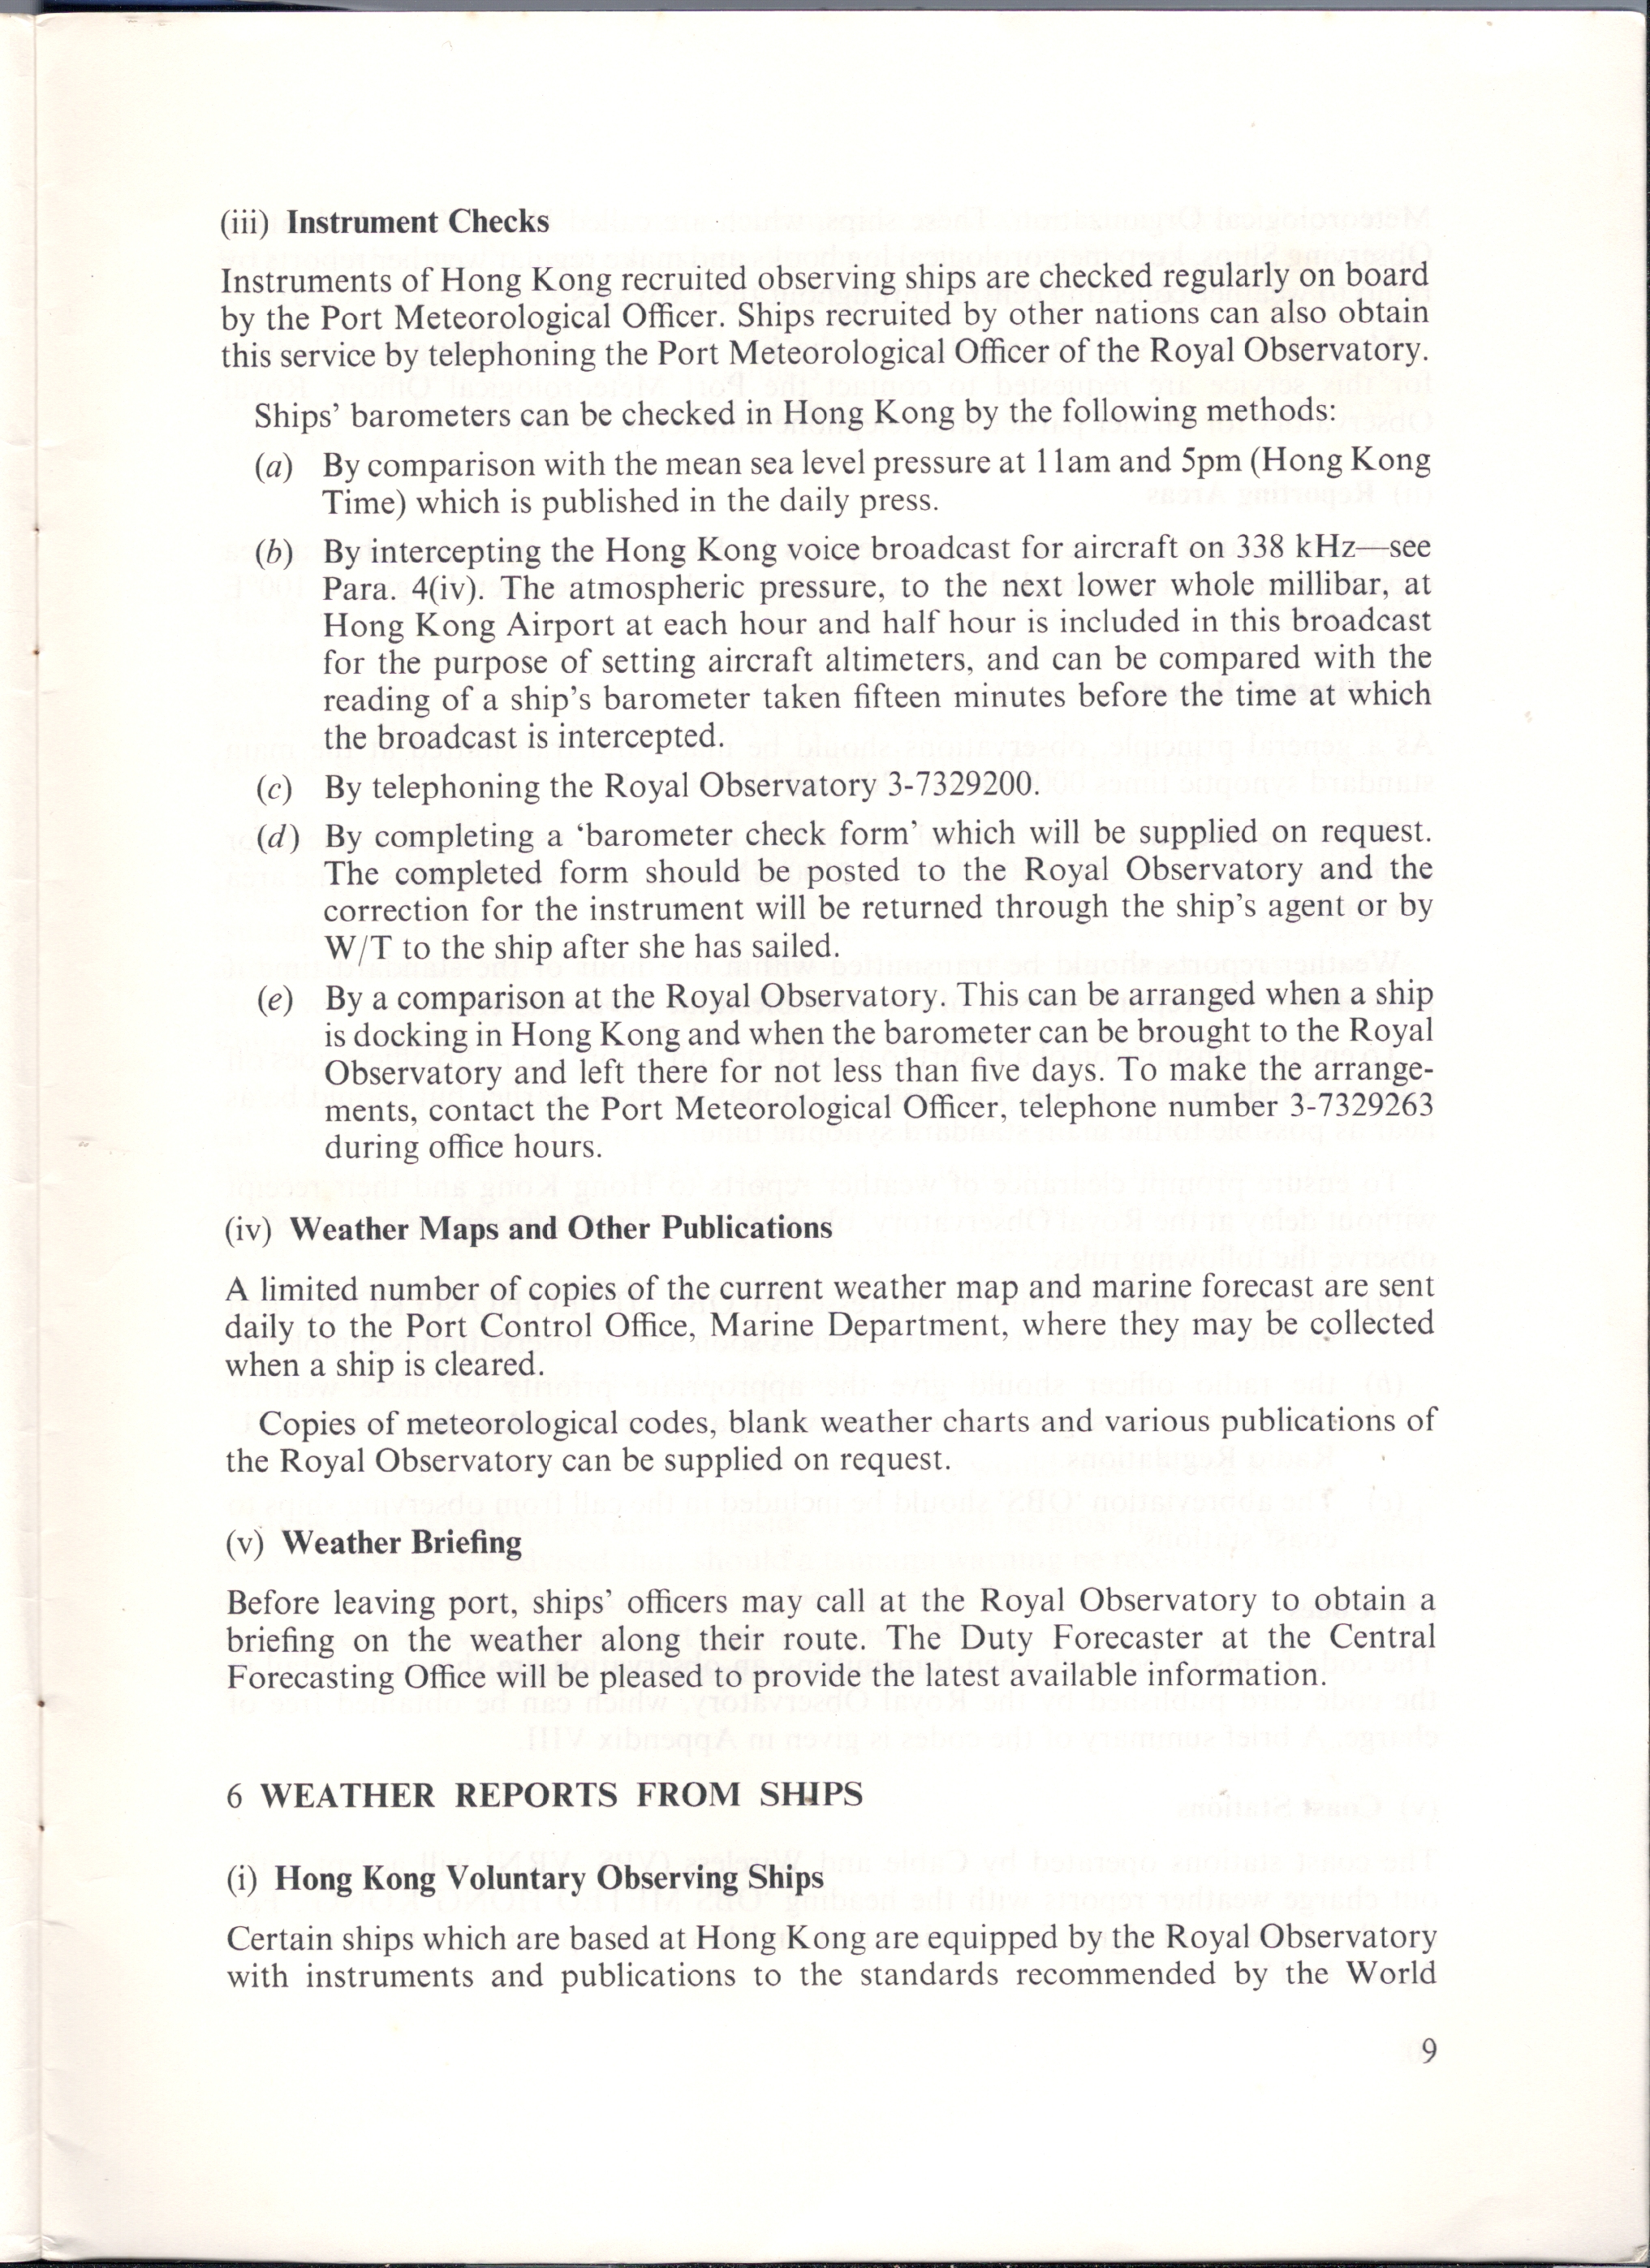 HONG KONG  WEATHER SERVICES FOR SHIPPING 1984 - 09.JPG